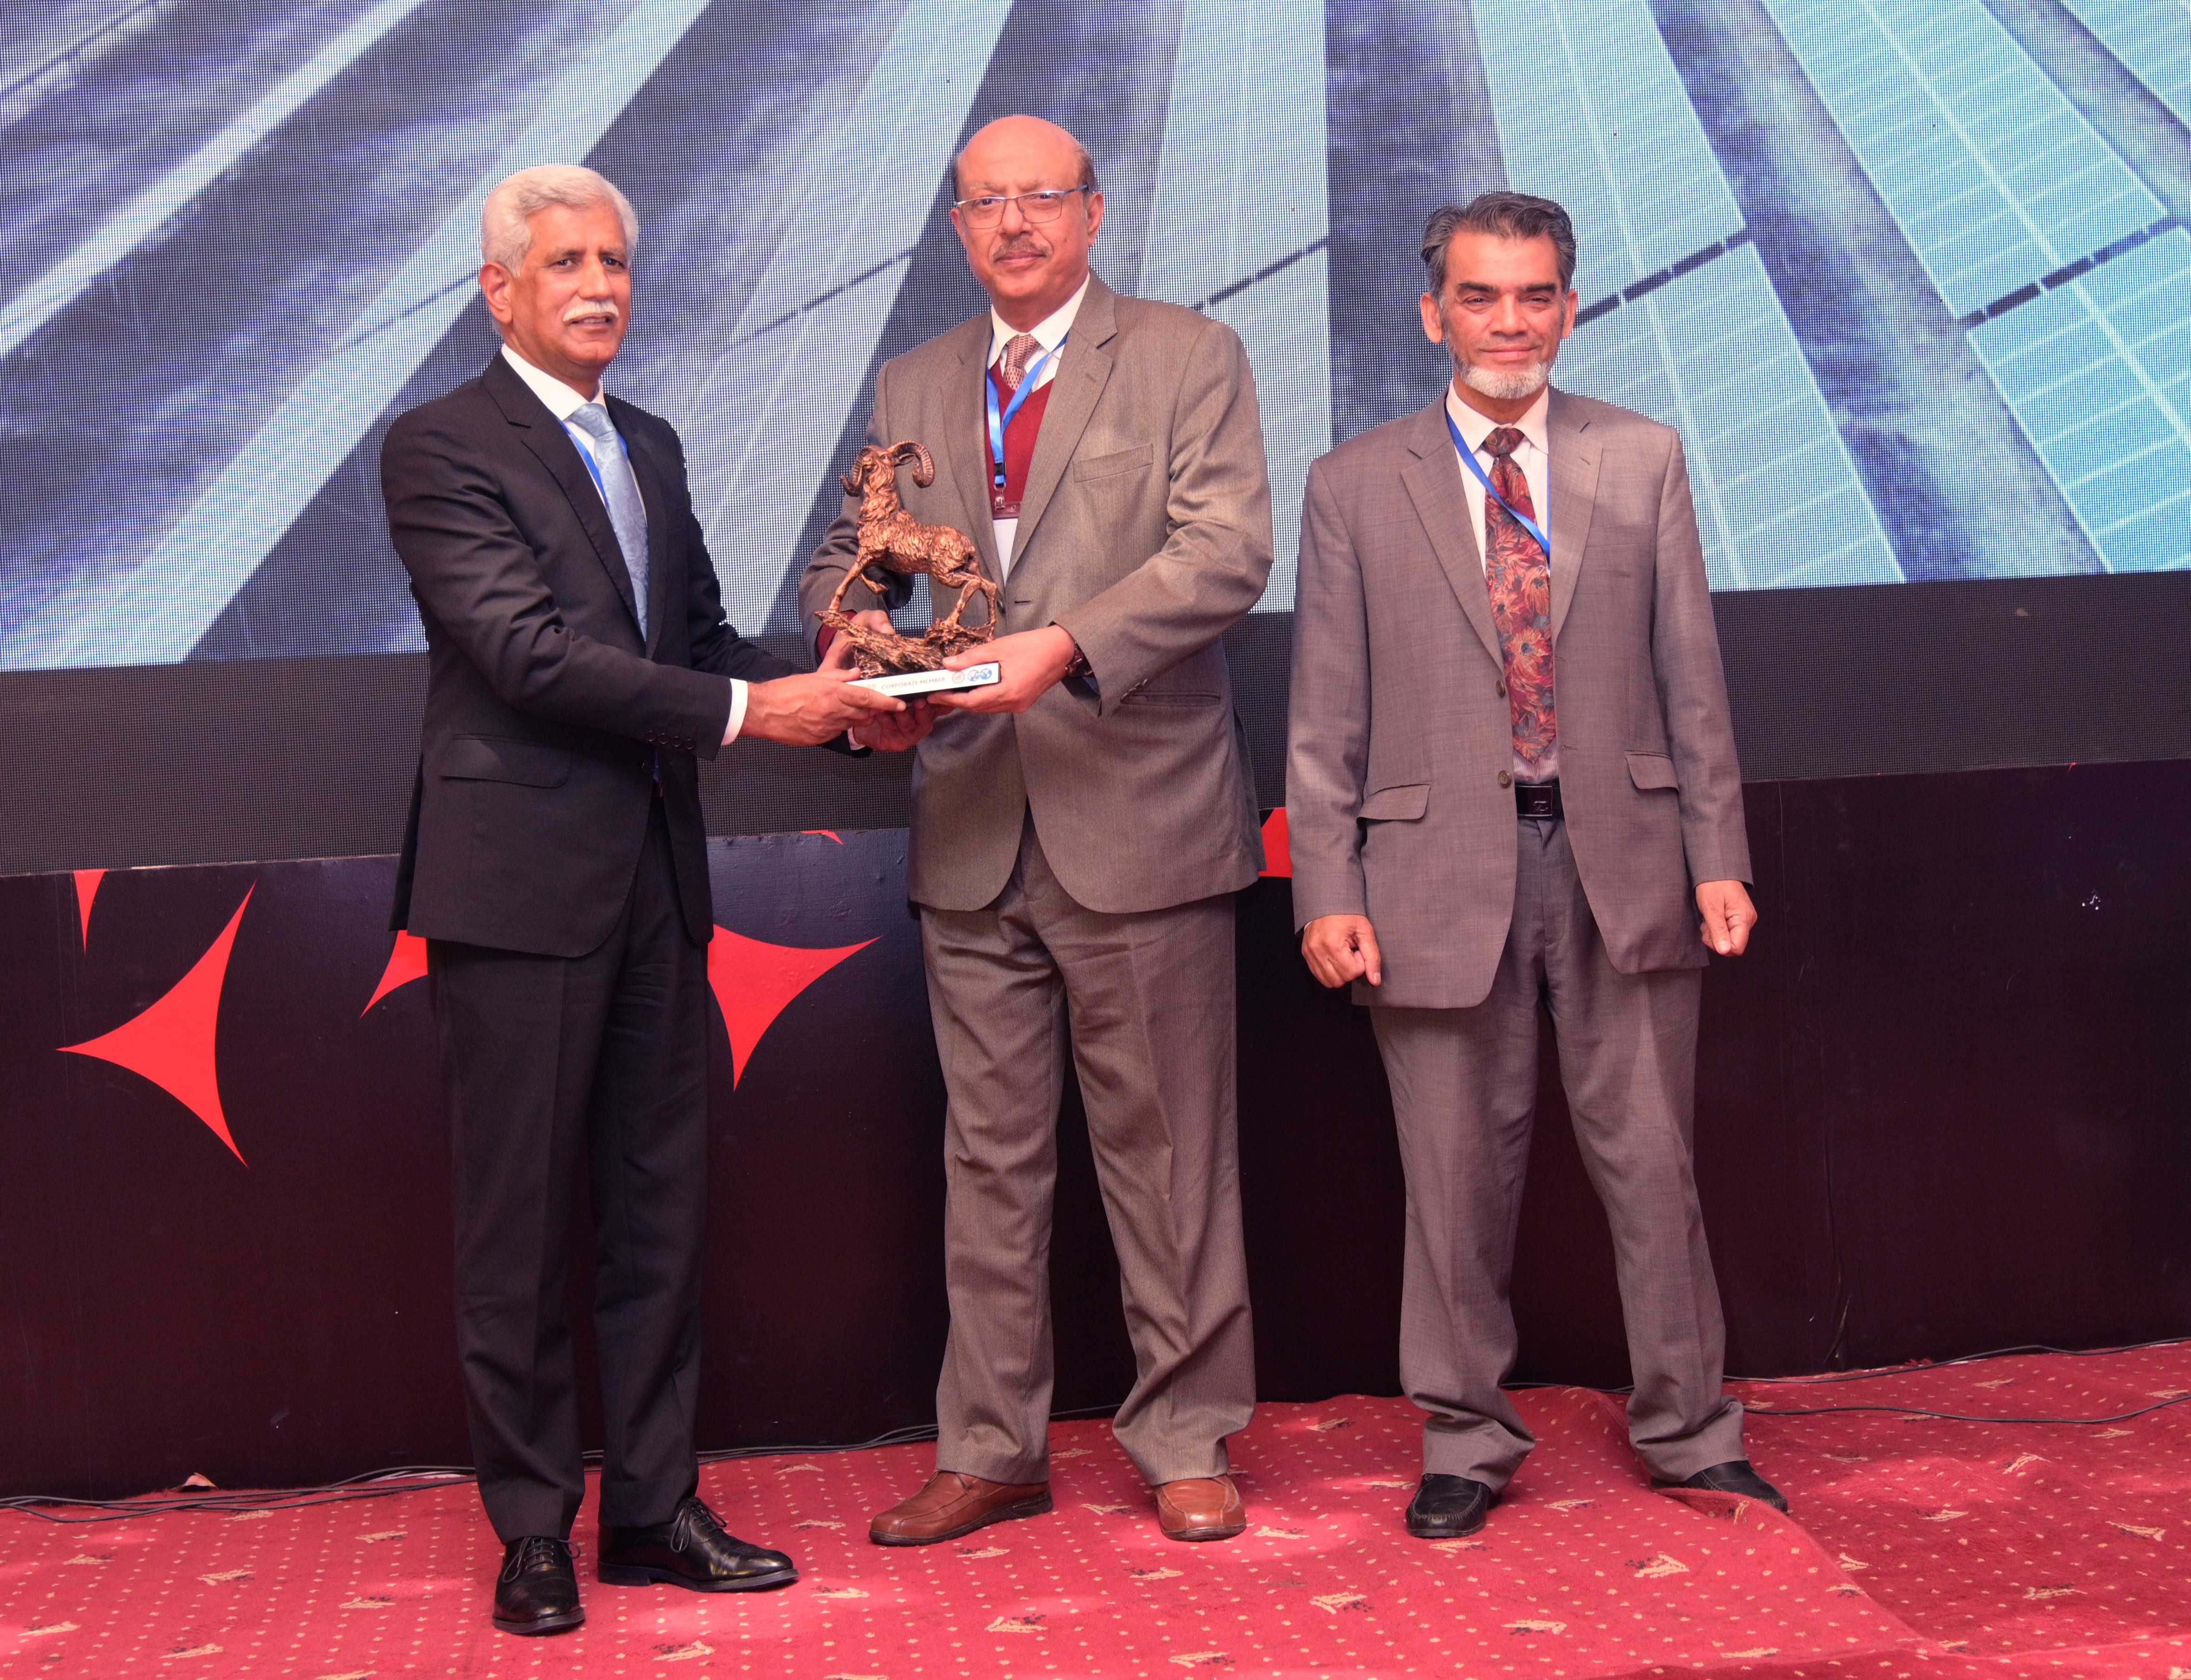 Shields distribution ceremony to the cooperate members at the event of conference and oil show